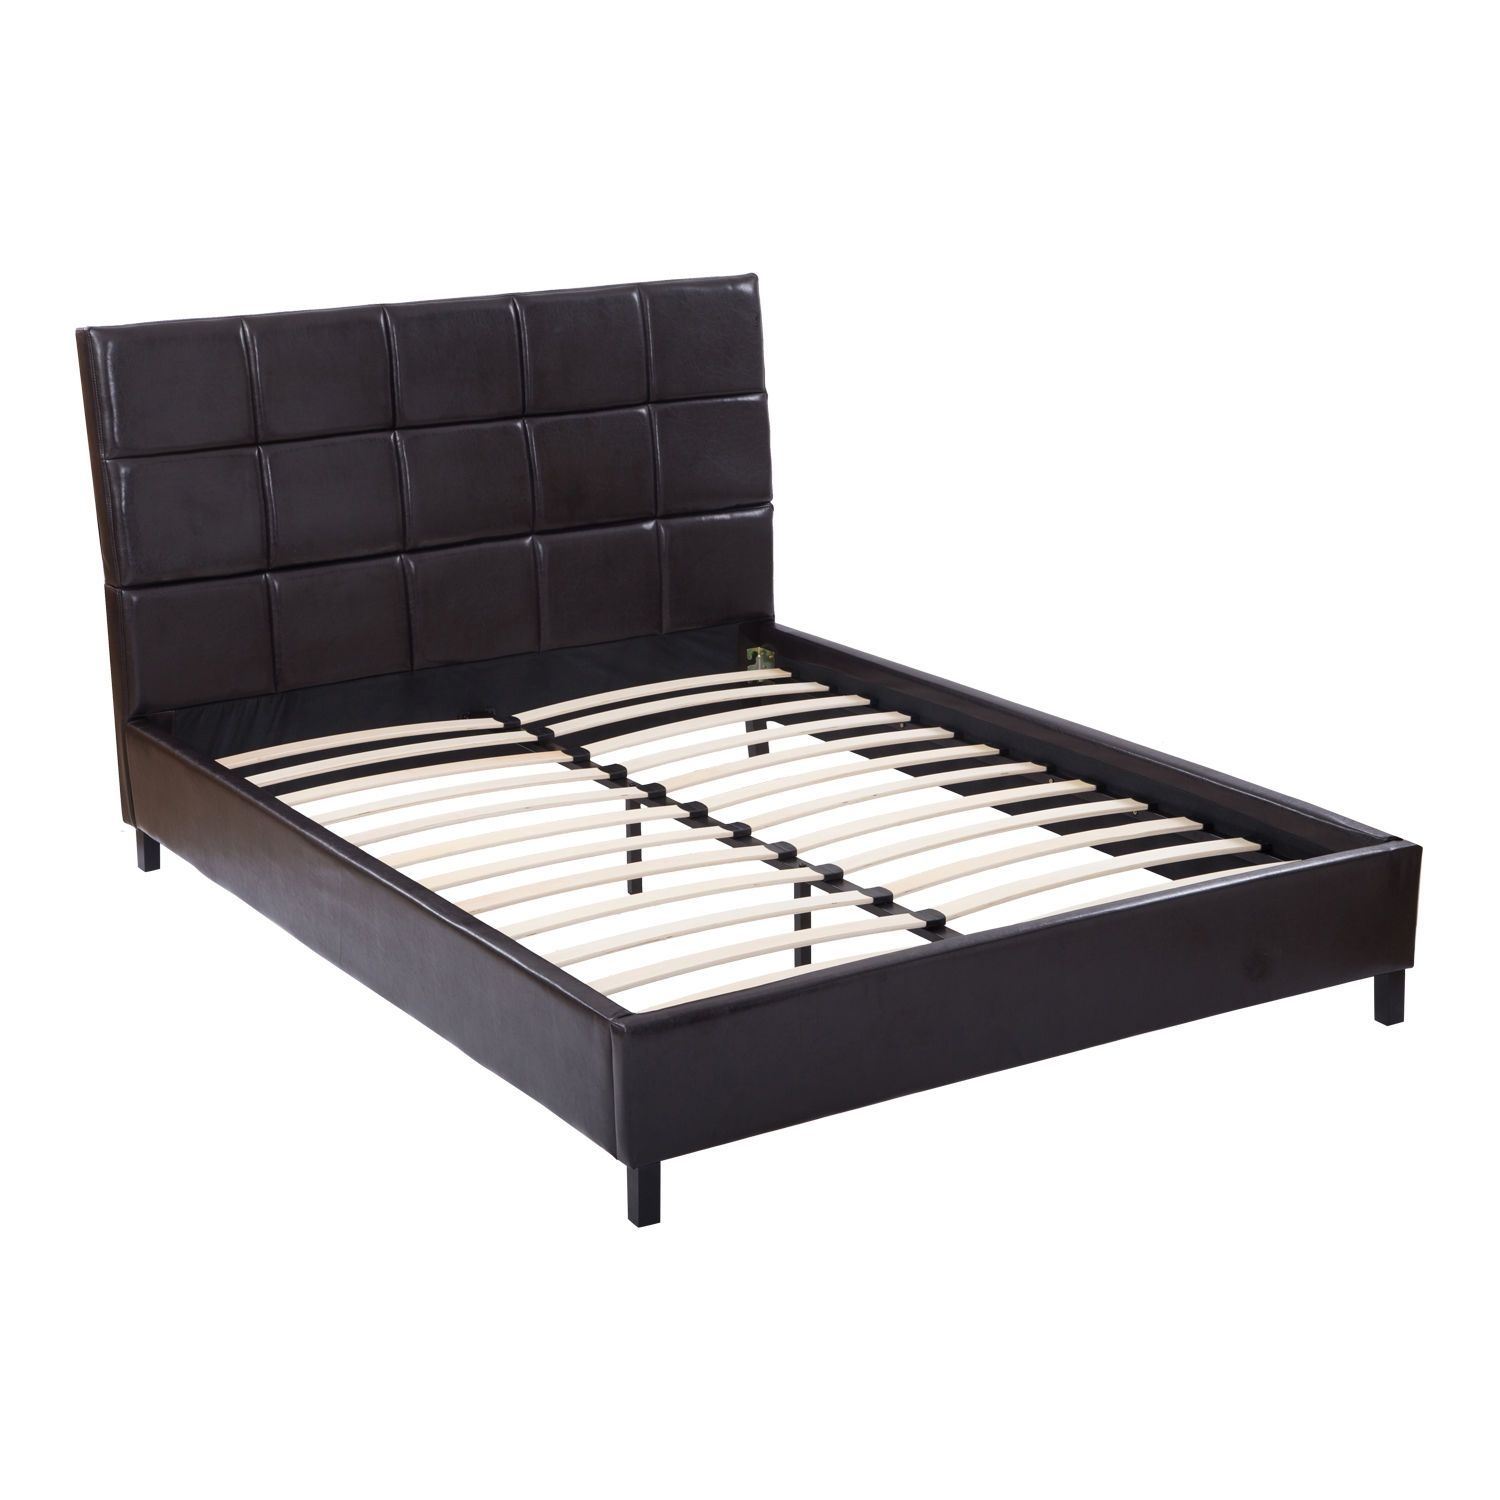 Low Profile Queen Bed Frames Visualhunt, Low Profile Platform Bed Frame Queen